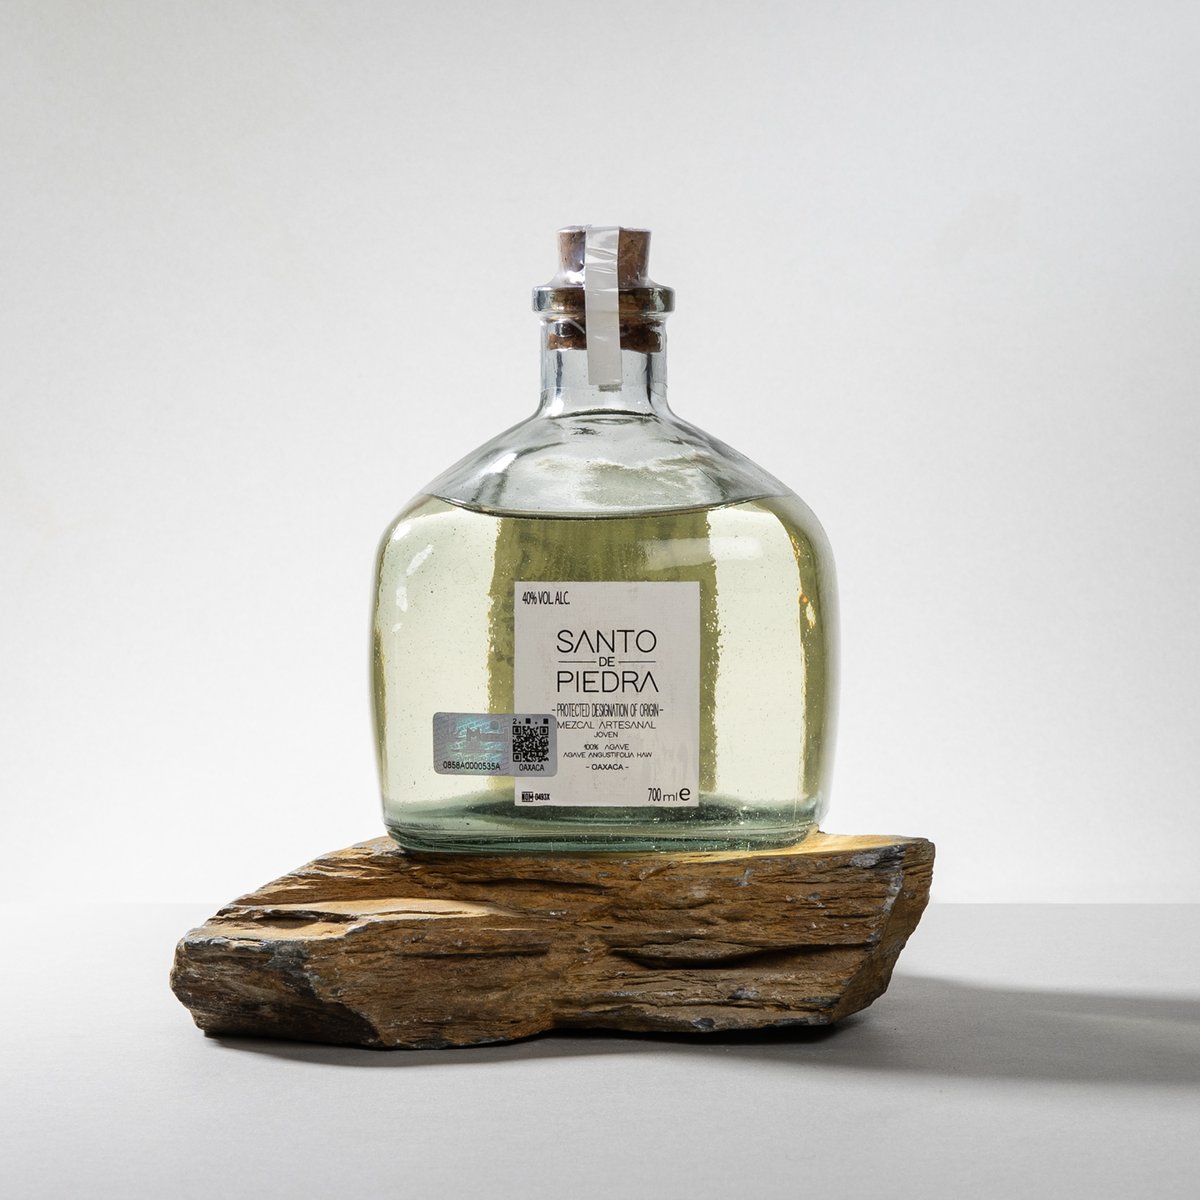 Santo de Piedra Espadin Mezcal | bit.ly/43IthVz 🔗 Santo de Piedra Mezcal is made entirely with Espadin agave. This is a fruitier-than-usual style of mezcal with notes of peach, grapefruit and apricot, alongside a peppery, smokey finish.